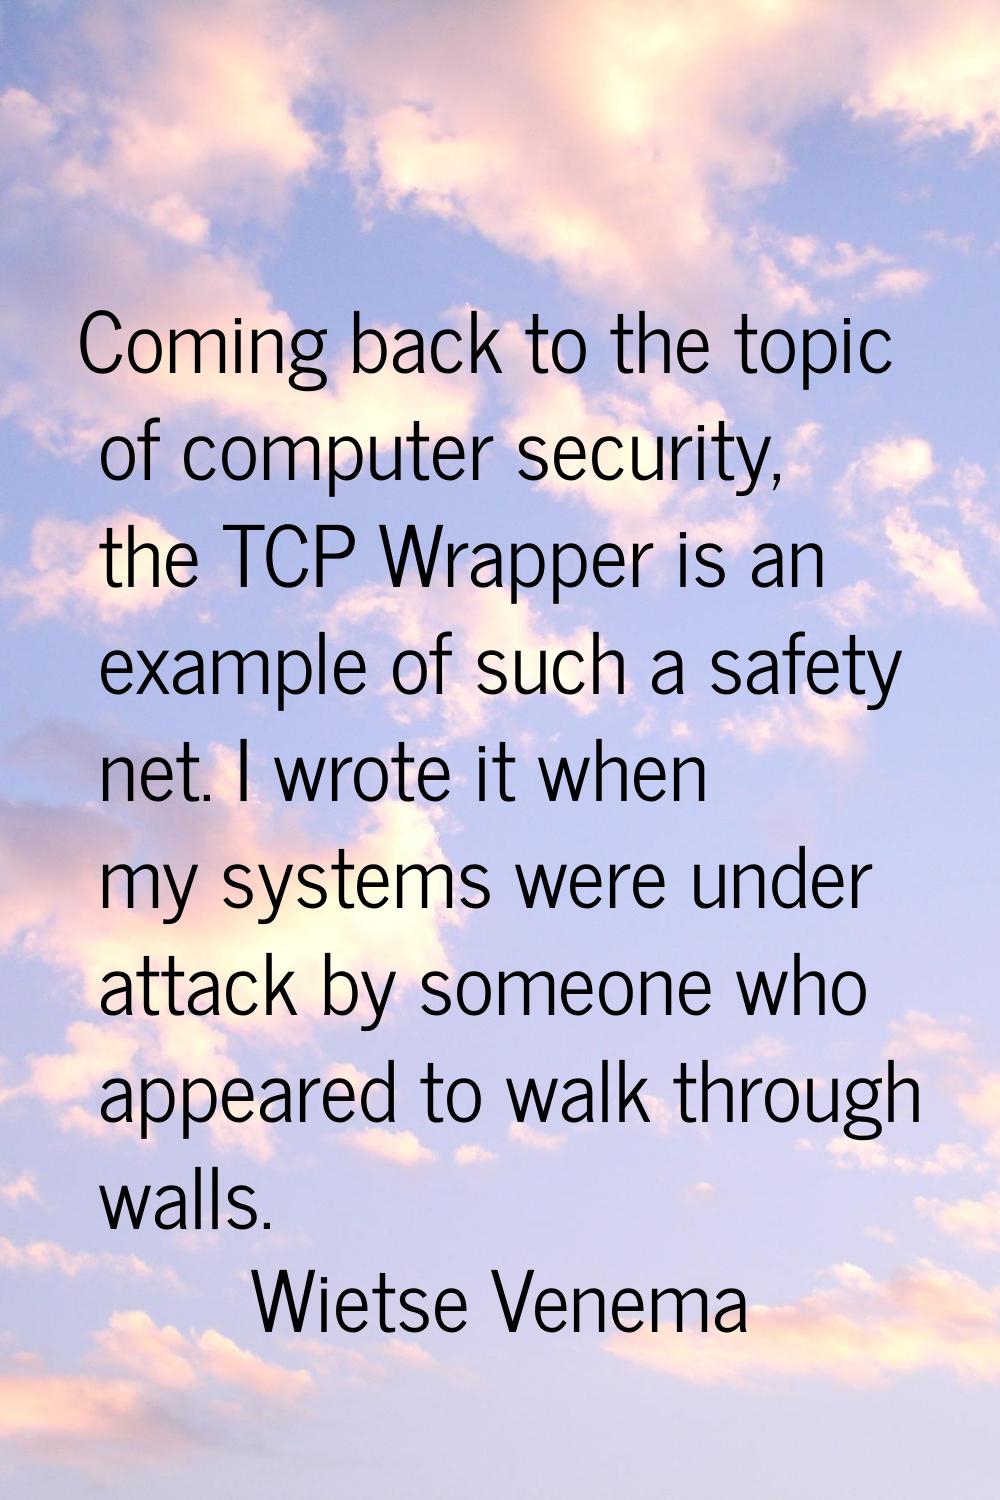 Coming back to the topic of computer security, the TCP Wrapper is an example of such a safety net. 